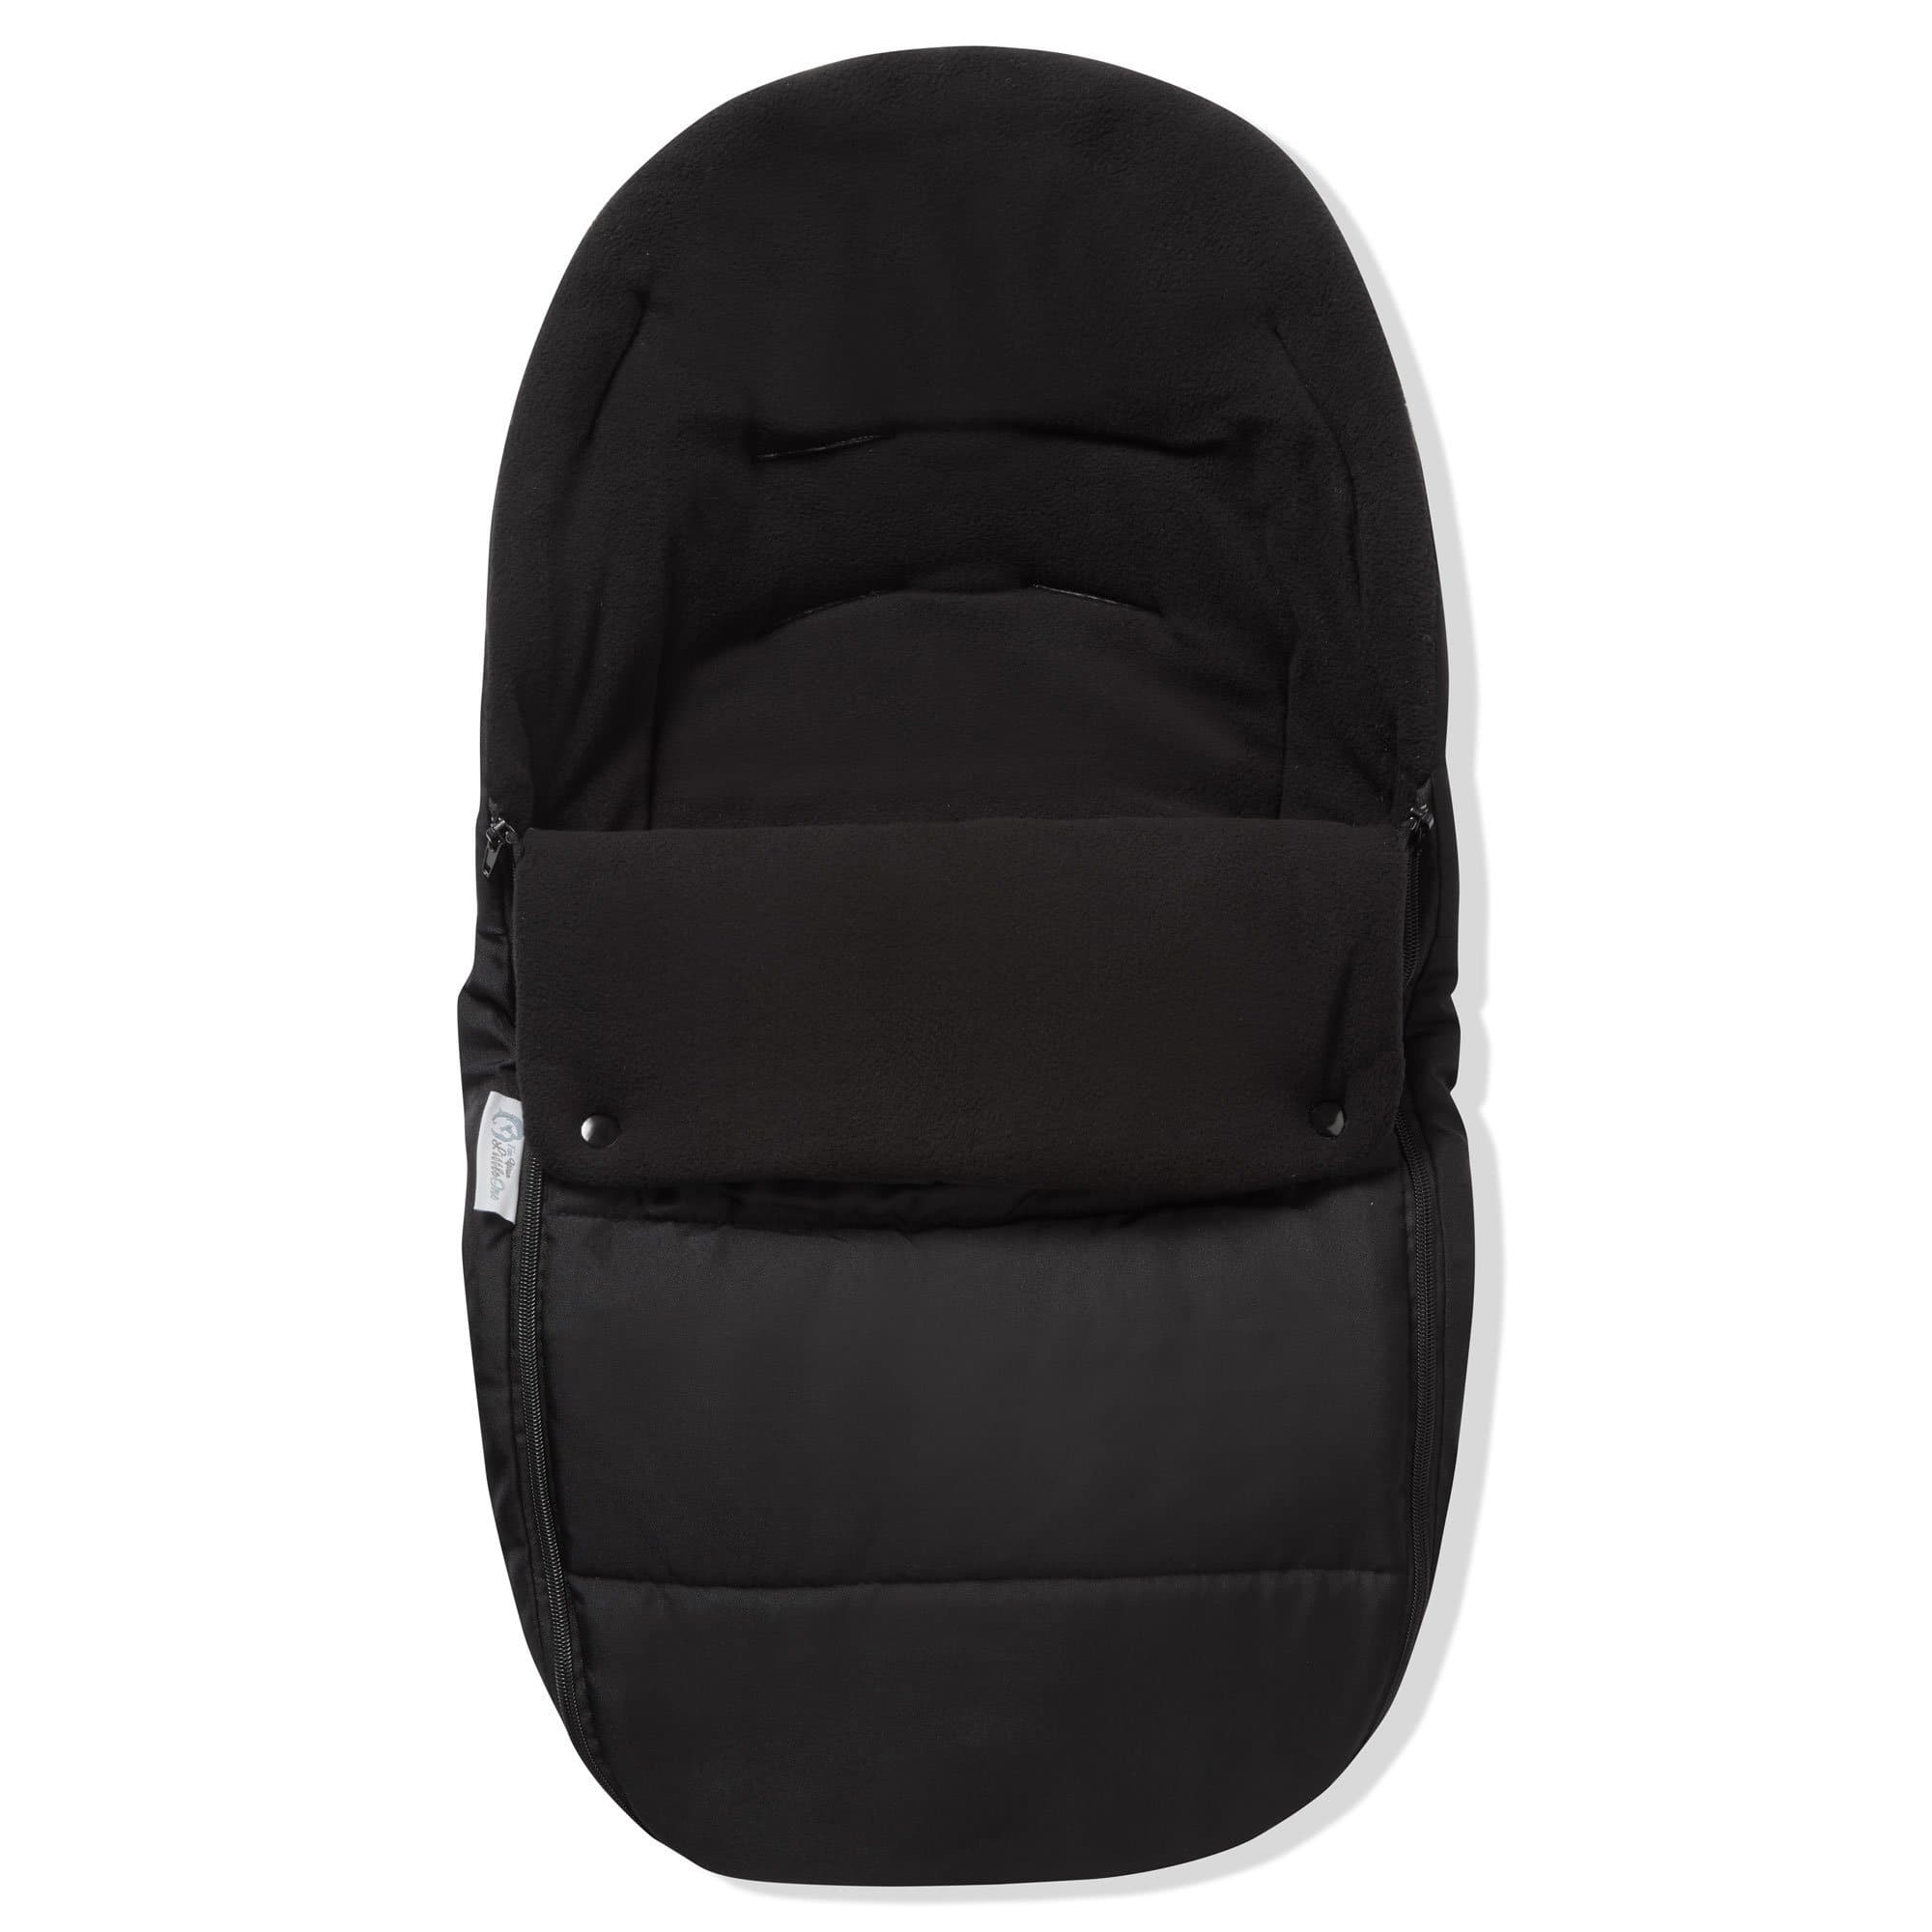 Premium Car Seat Footmuff / Cosy Toes Compatible with Phil & Teds - Black Jack / Fits All Models | For Your Little One